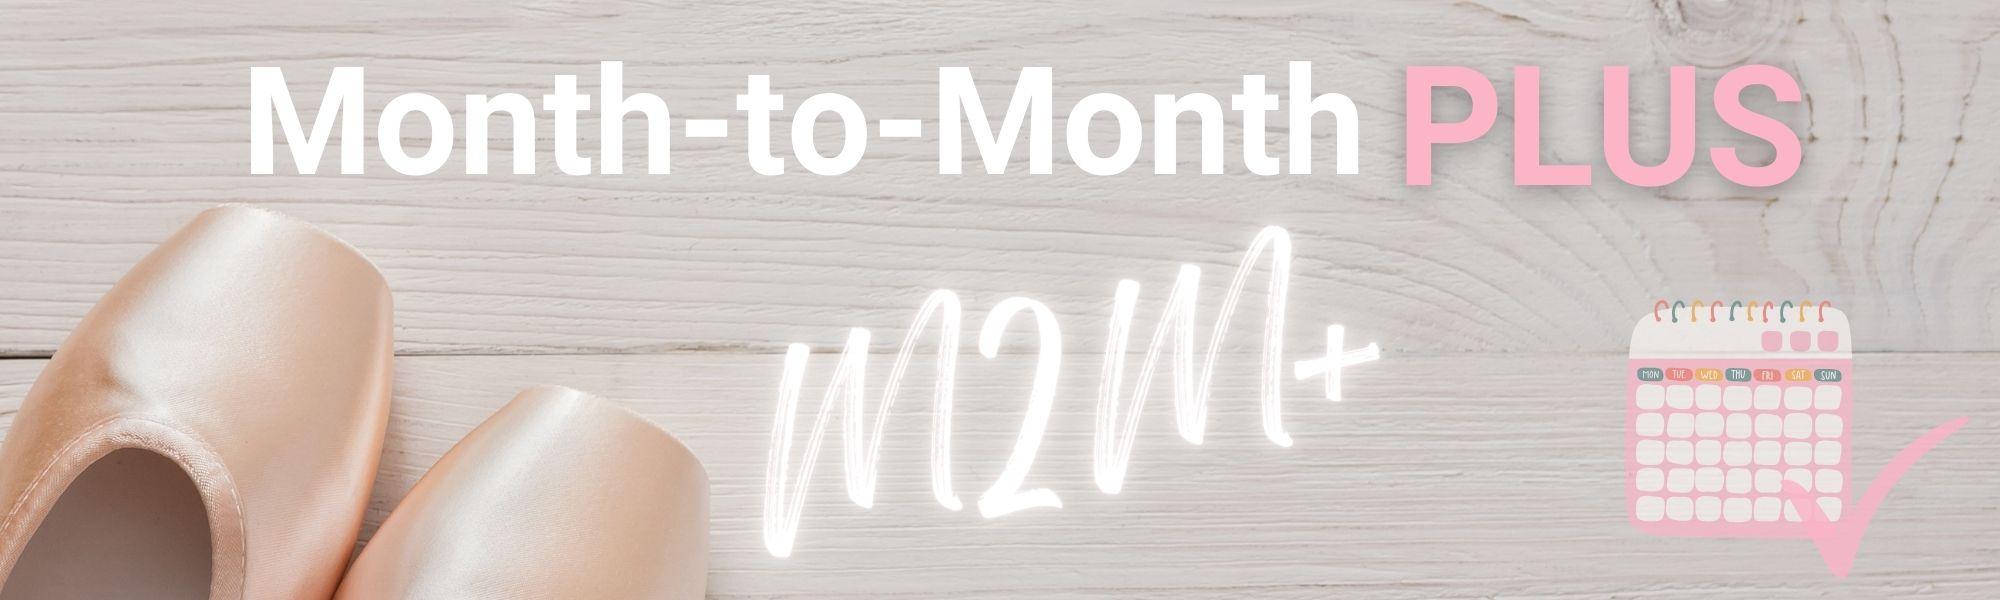 Ballet shoes and headline Month to Month Plus